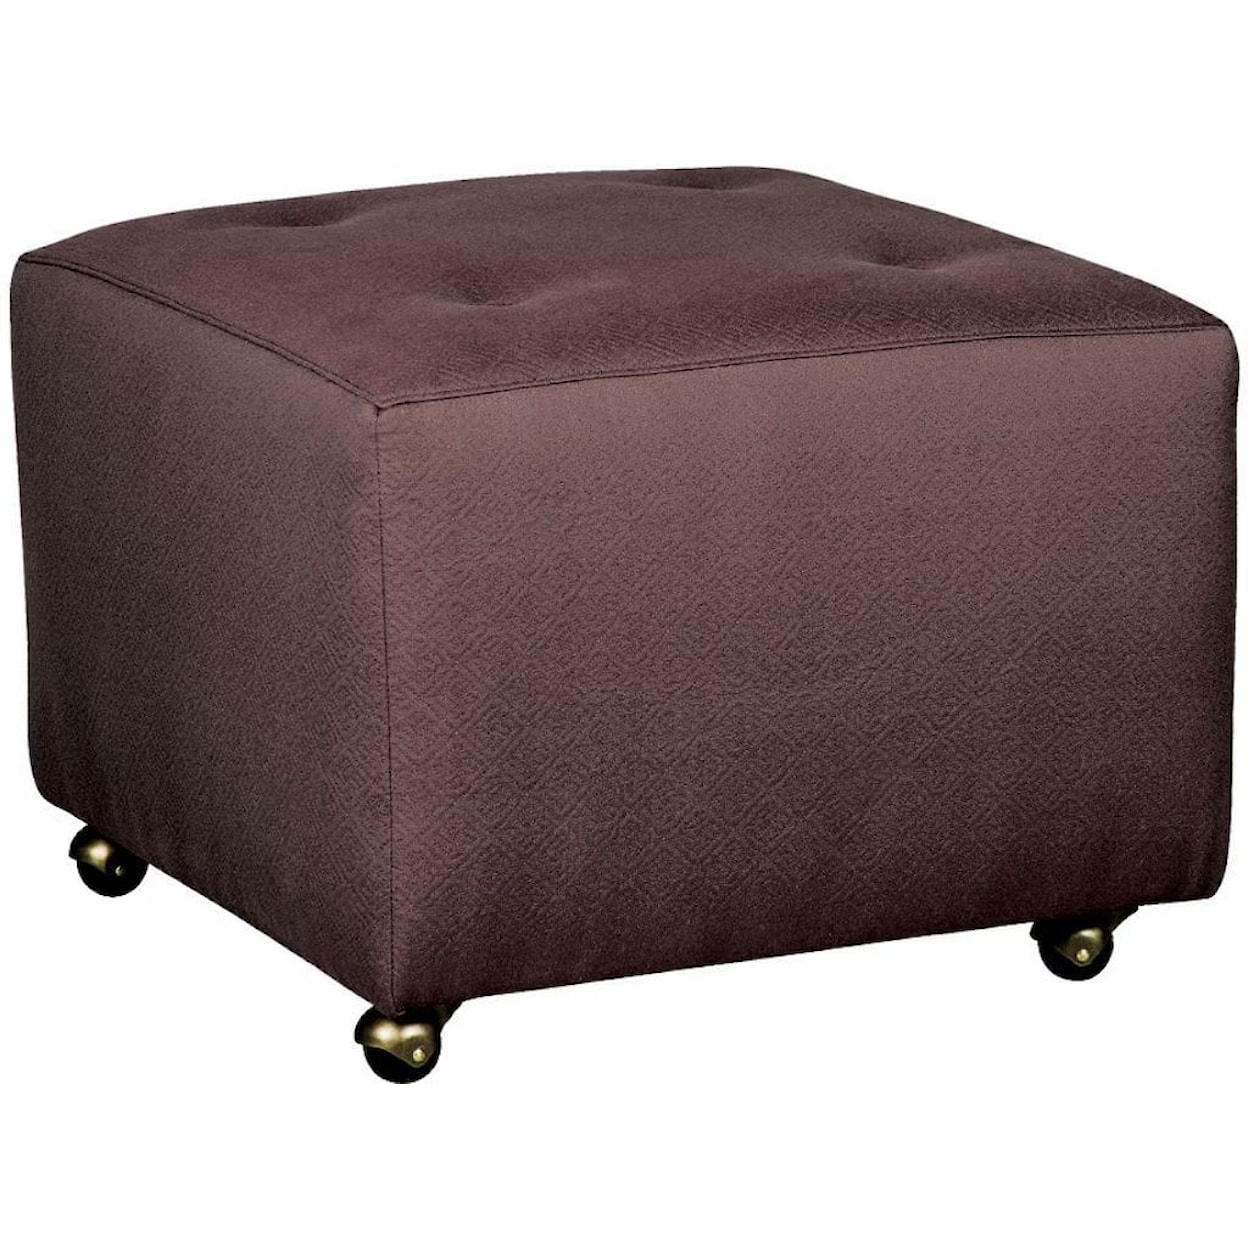 Craftmaster Craftmaster Tufted Accent Ottoman